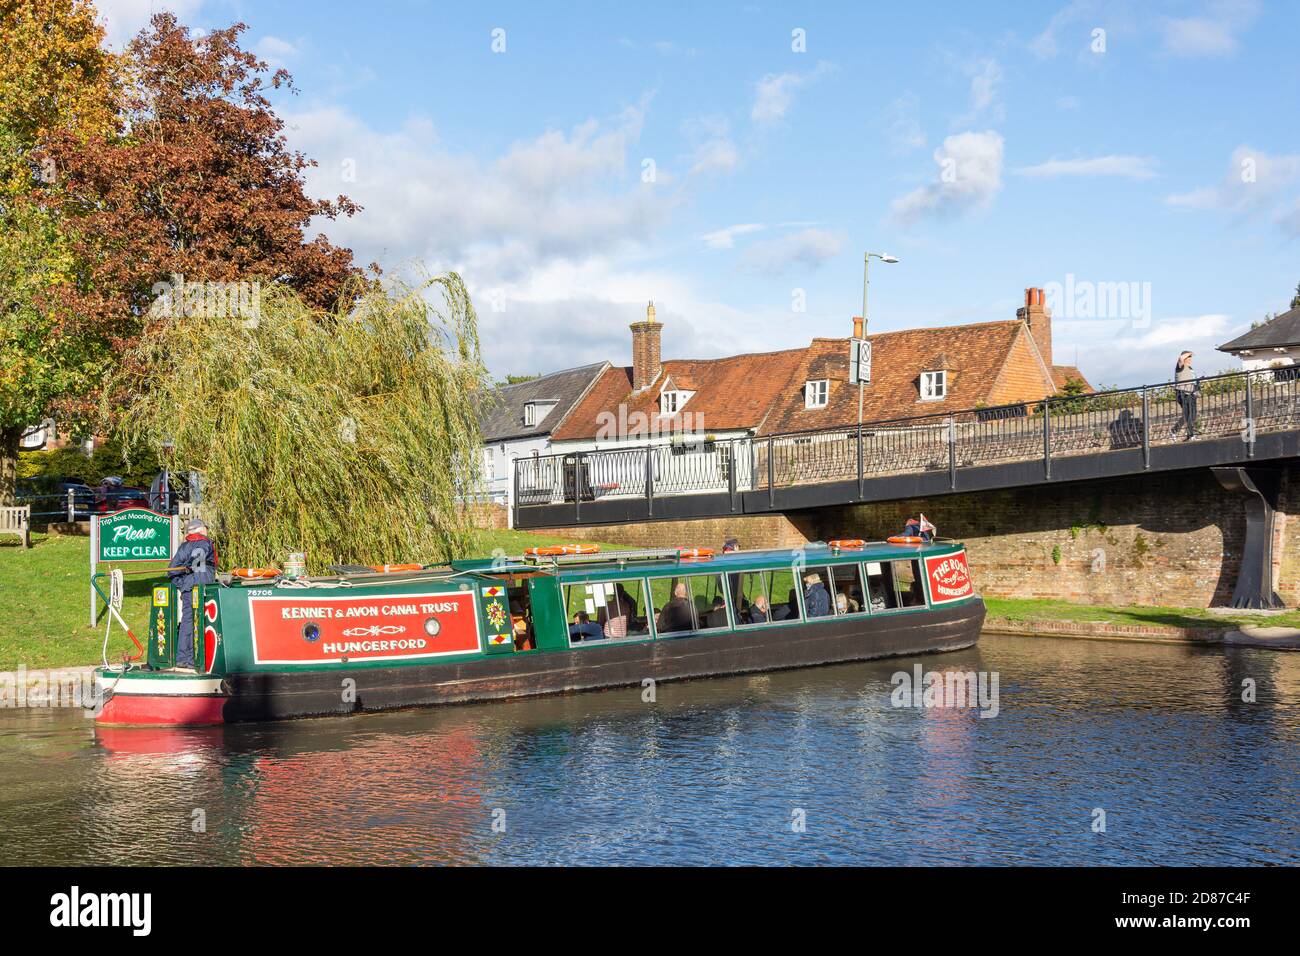 Canal boat moored at Hungerford Wharf, High Street, Hungerford, Berkshire, England, United Kingdom Stock Photo